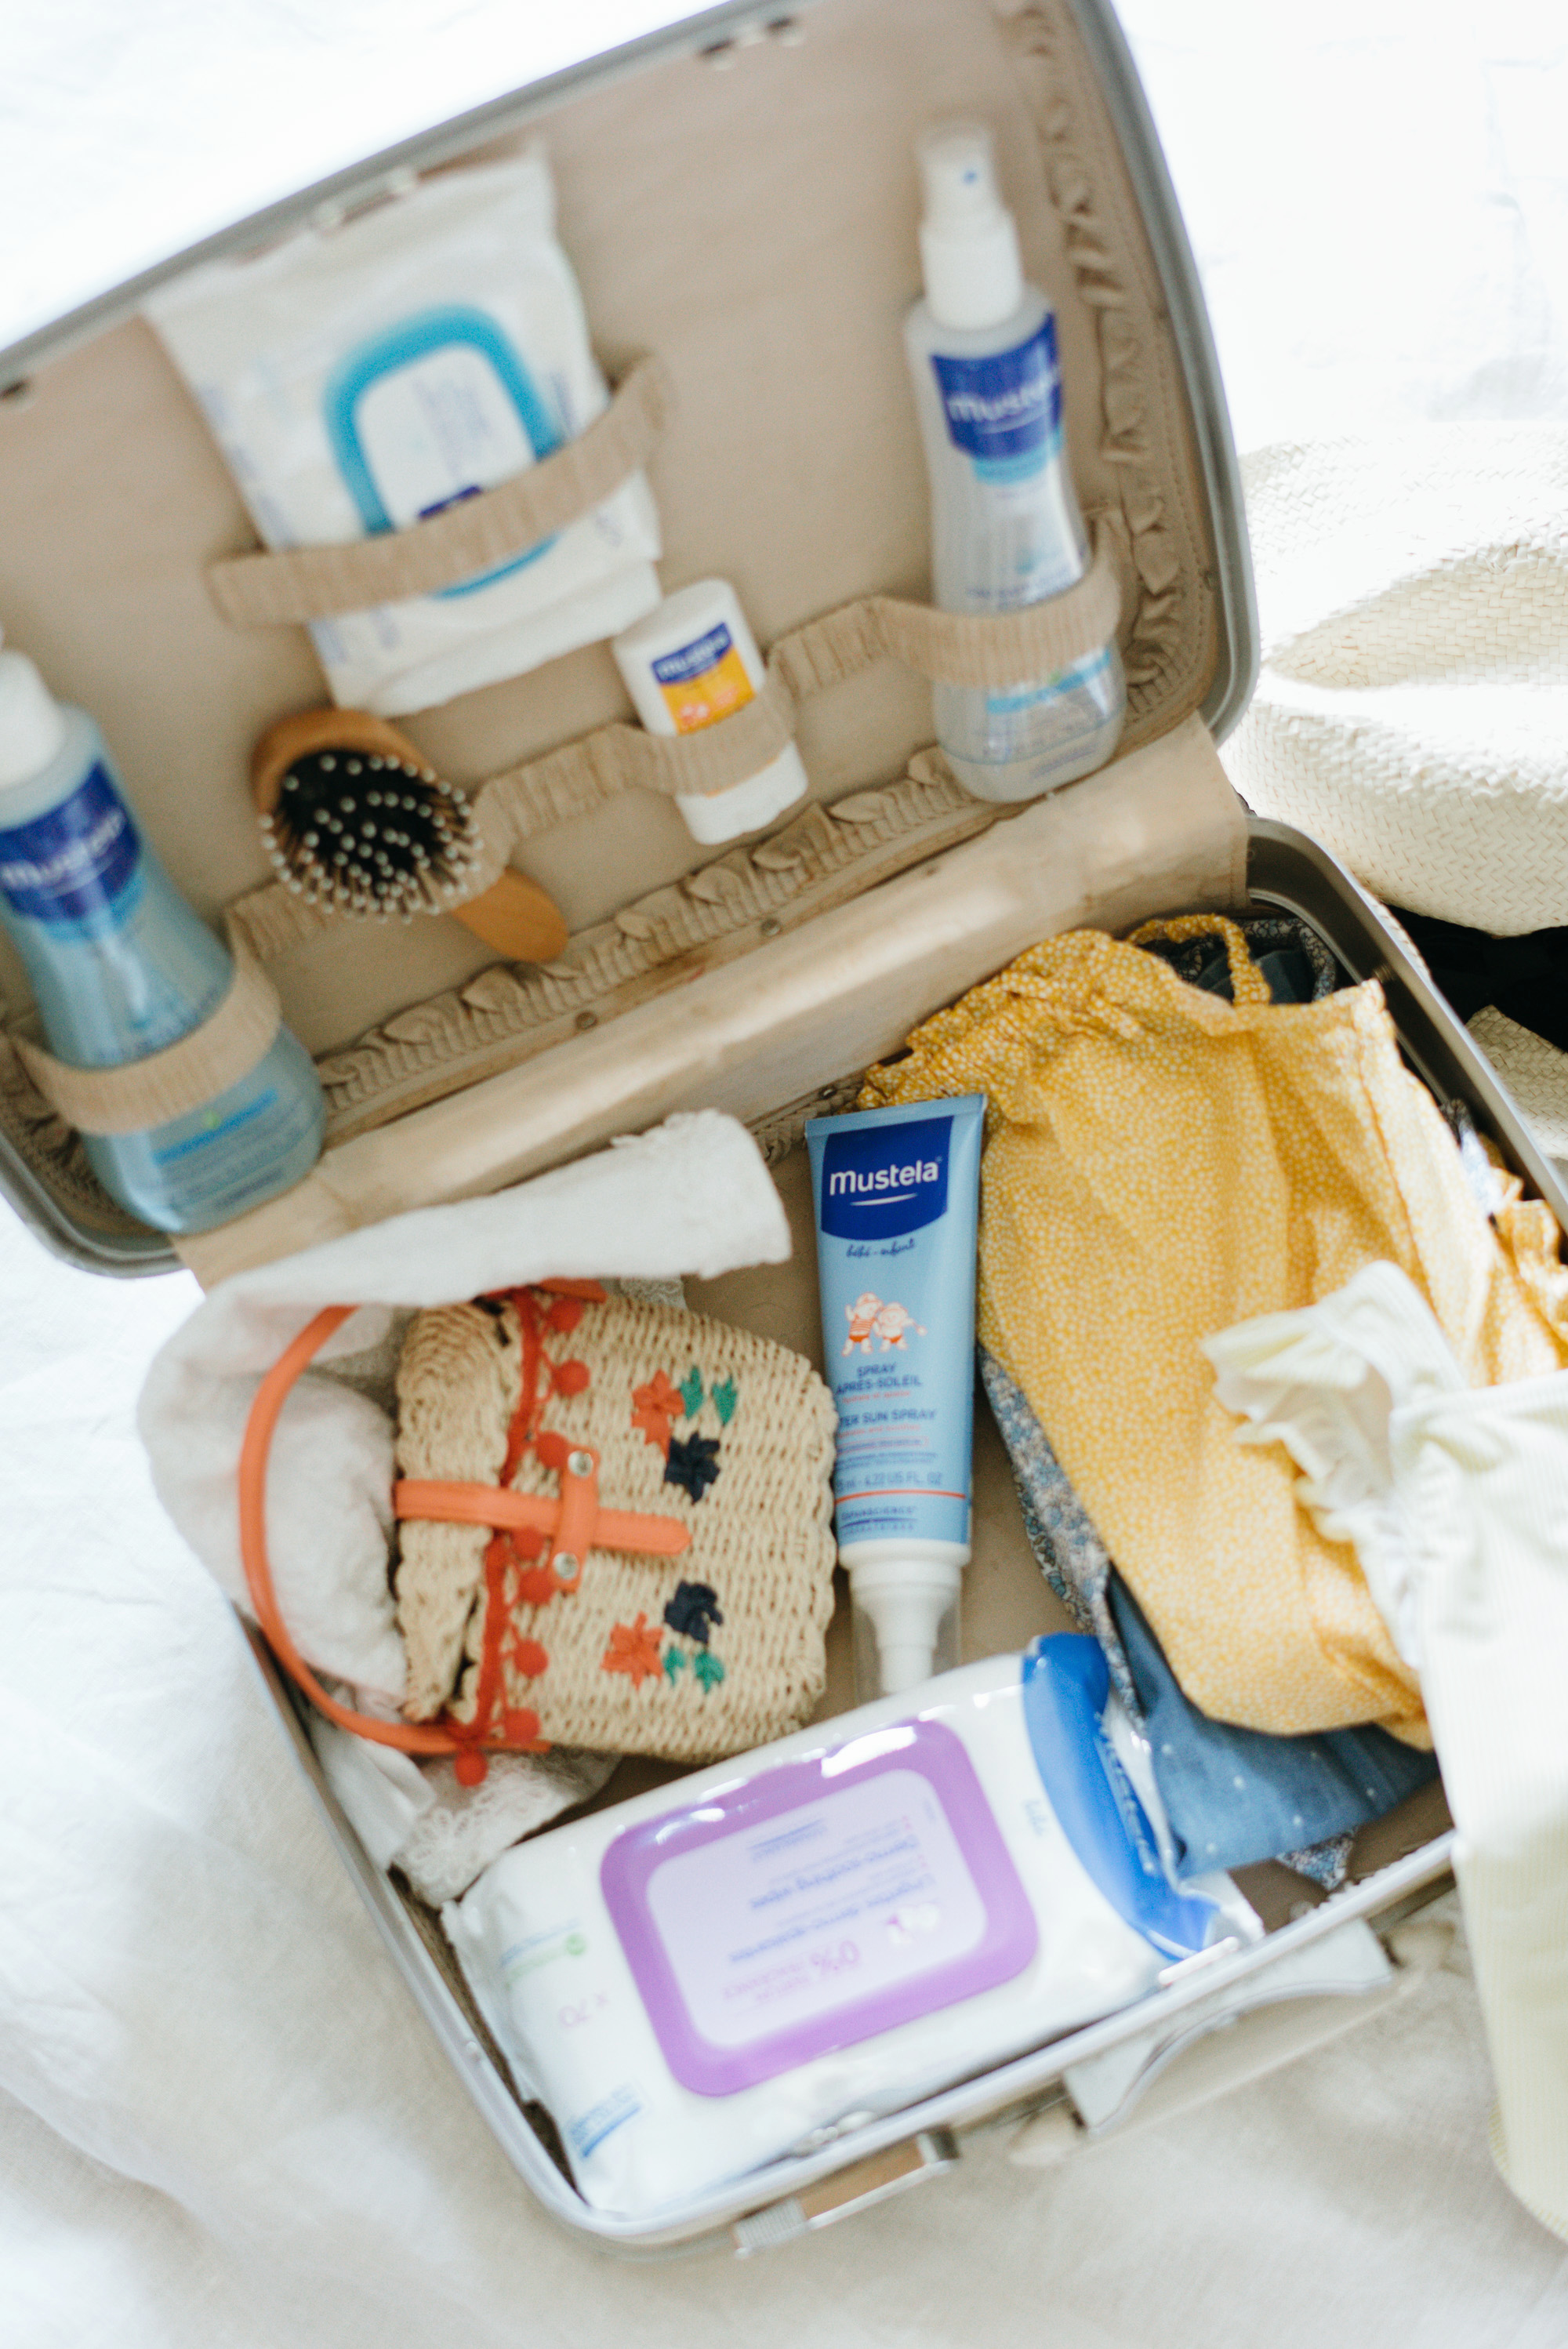 Lifesaving Snack Boxes For Traveling With Toddlers - The Mama Notes